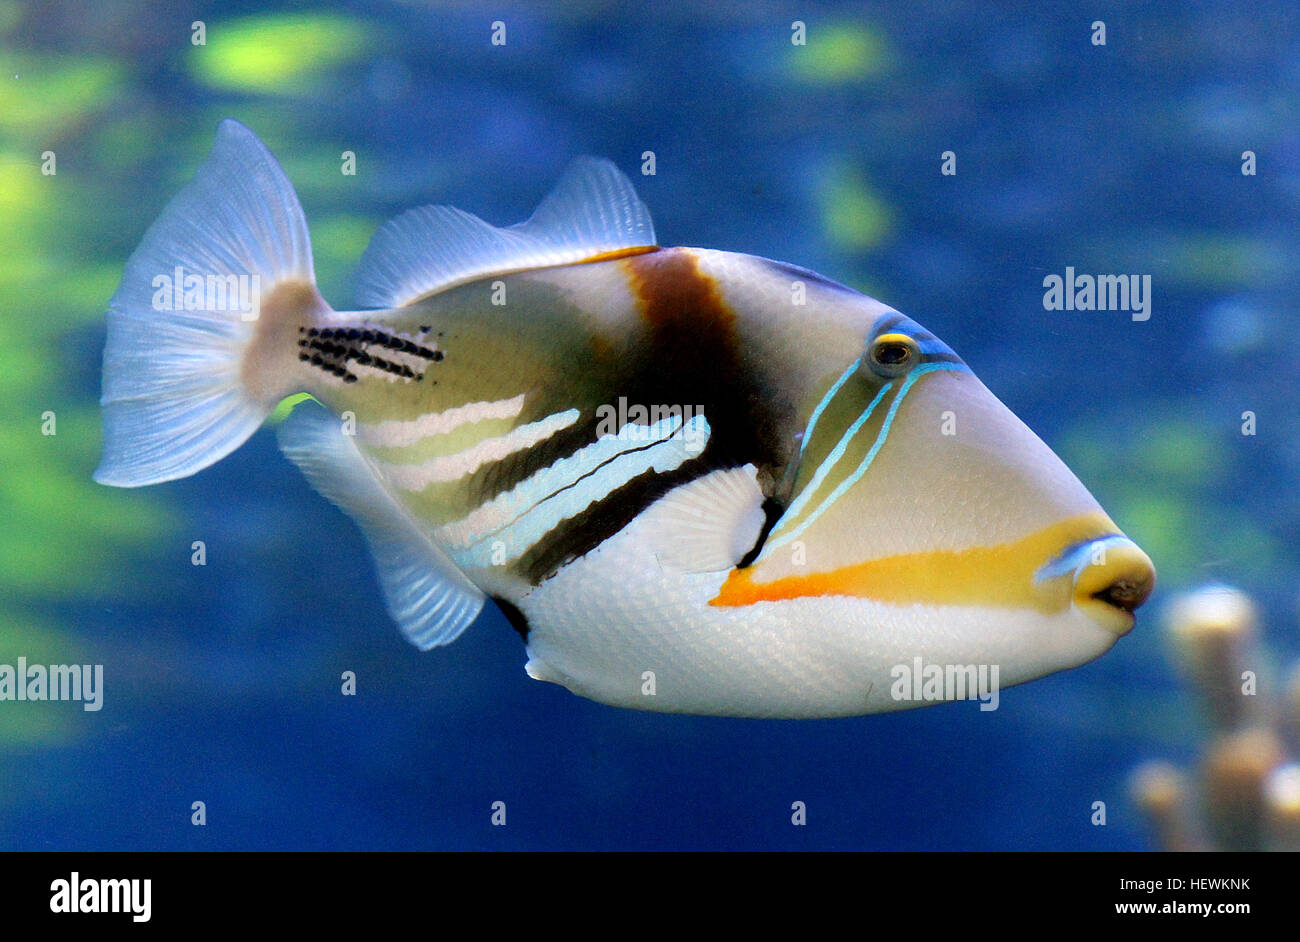 The reef, rectangular, or wedge-tail triggerfish, also known by its Hawaiian name, humuhumunukunukuāpuaʻa (pronounced [ˈhumuˈhumuˈnukuˈnukuˈwaːpuˈwɐʔə]), also spelled Humuhumunukunukuapua'a or just humuhumu for short; meaning &quot;triggerfish with a snout like a pig.&quot; is one of several species of triggerfish. Classified as Rhinecanthus rectangulus, it is endemic to the salt water coasts of various central and south Pacific Ocean islands. It is often asserted that the Hawaiian name is one of the longest words in the Hawaiian language and that &quot;the name is longer than the fish.&quot; Stock Photo